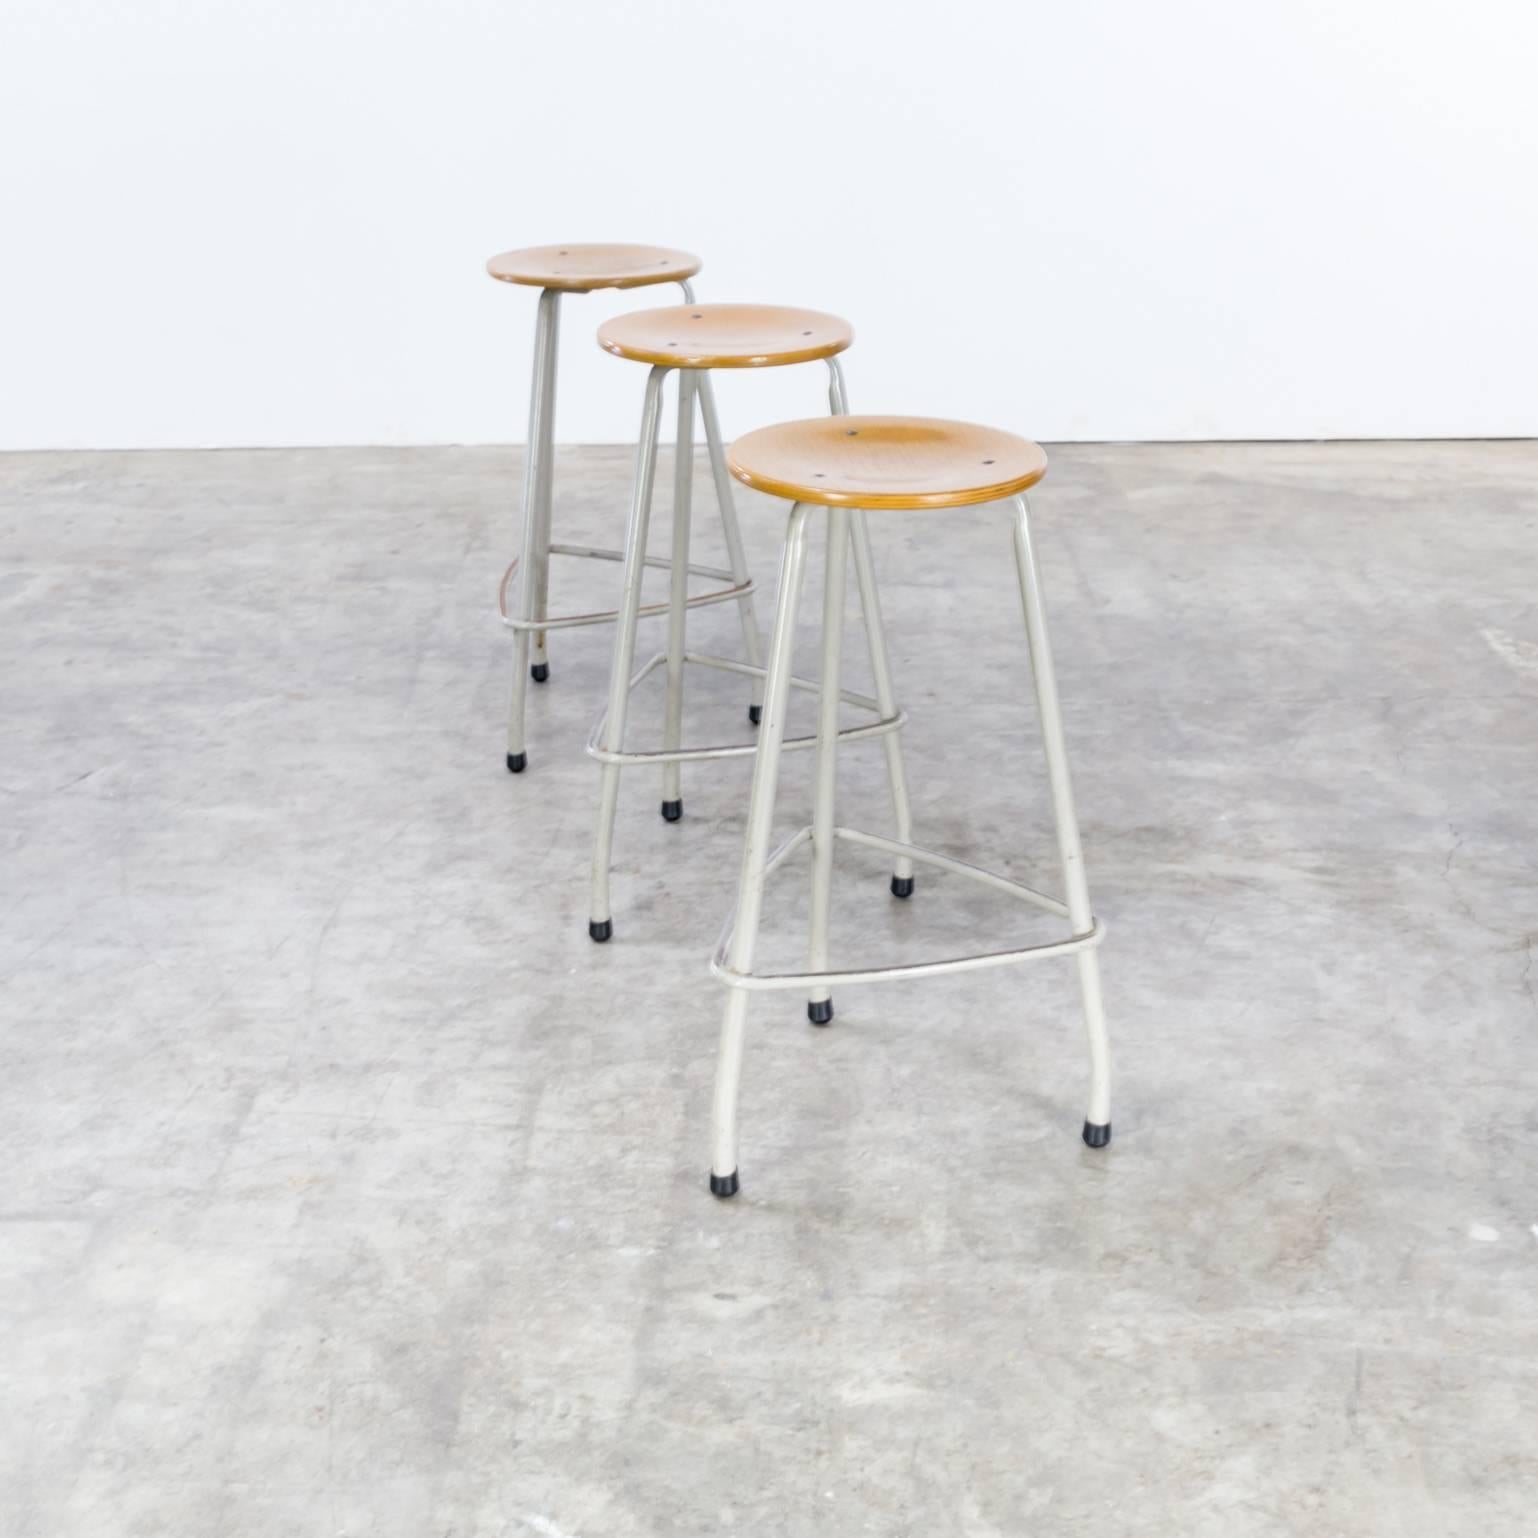 1960s Friso Kramer set stools for Ahrend de Cirkel, set of three. Good condition wear consistent with age and use.